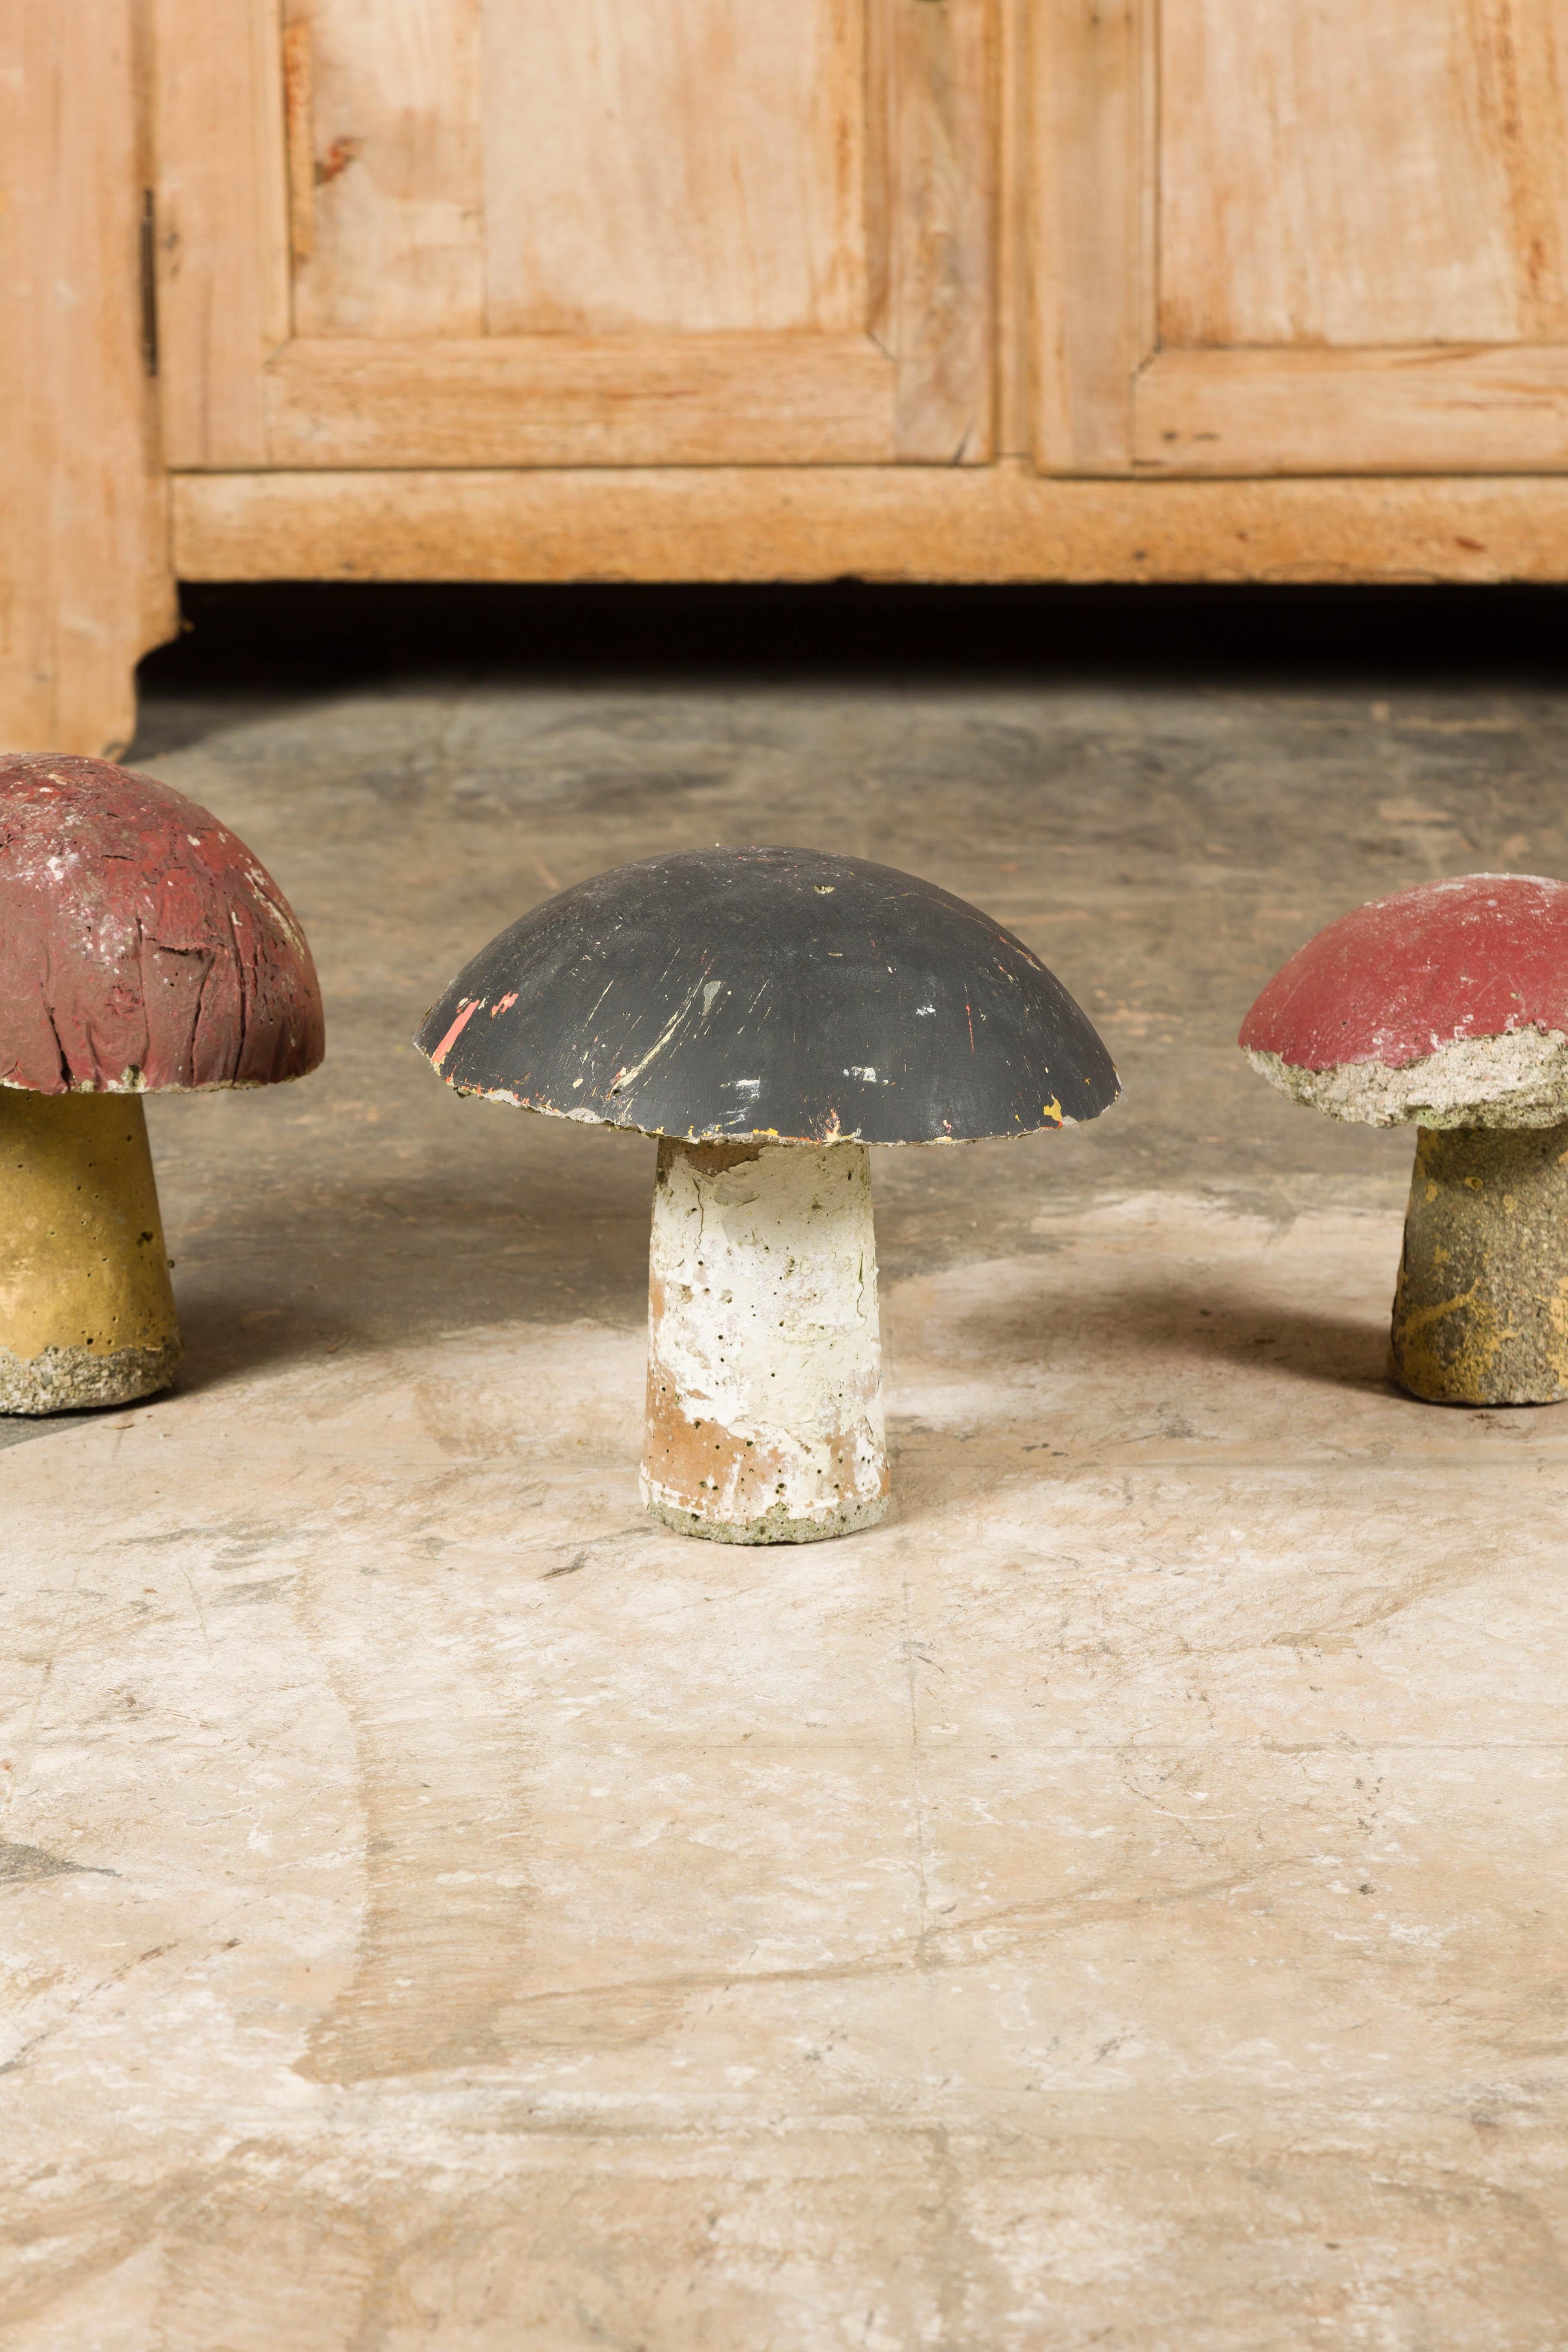 Set of Three American Midcentury Painted Concrete Mushroom Garden Ornaments For Sale 2